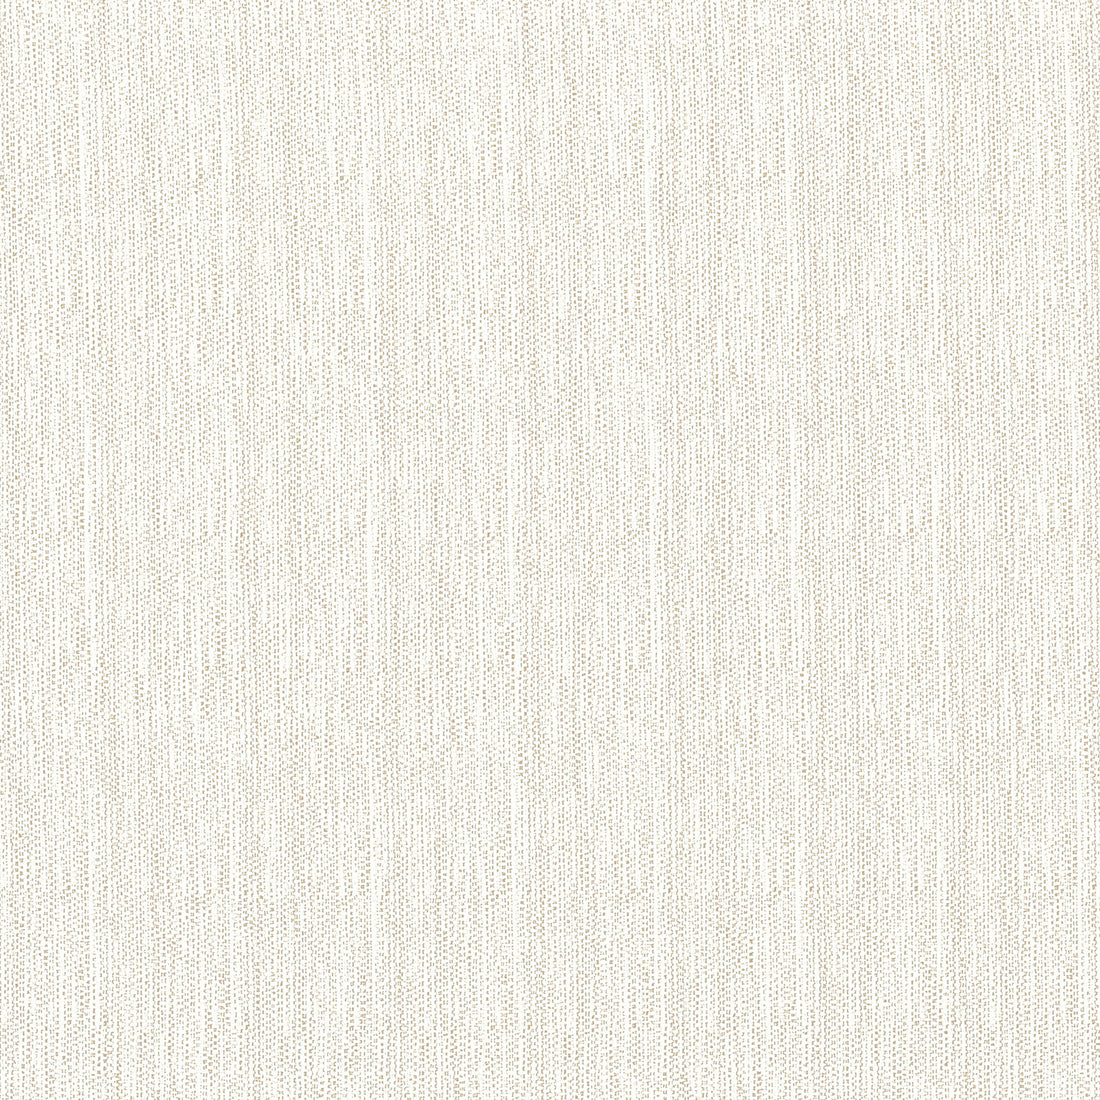 Silas fabric in oatmeal color - pattern number W81620 - by Thibaut in the Locale collection